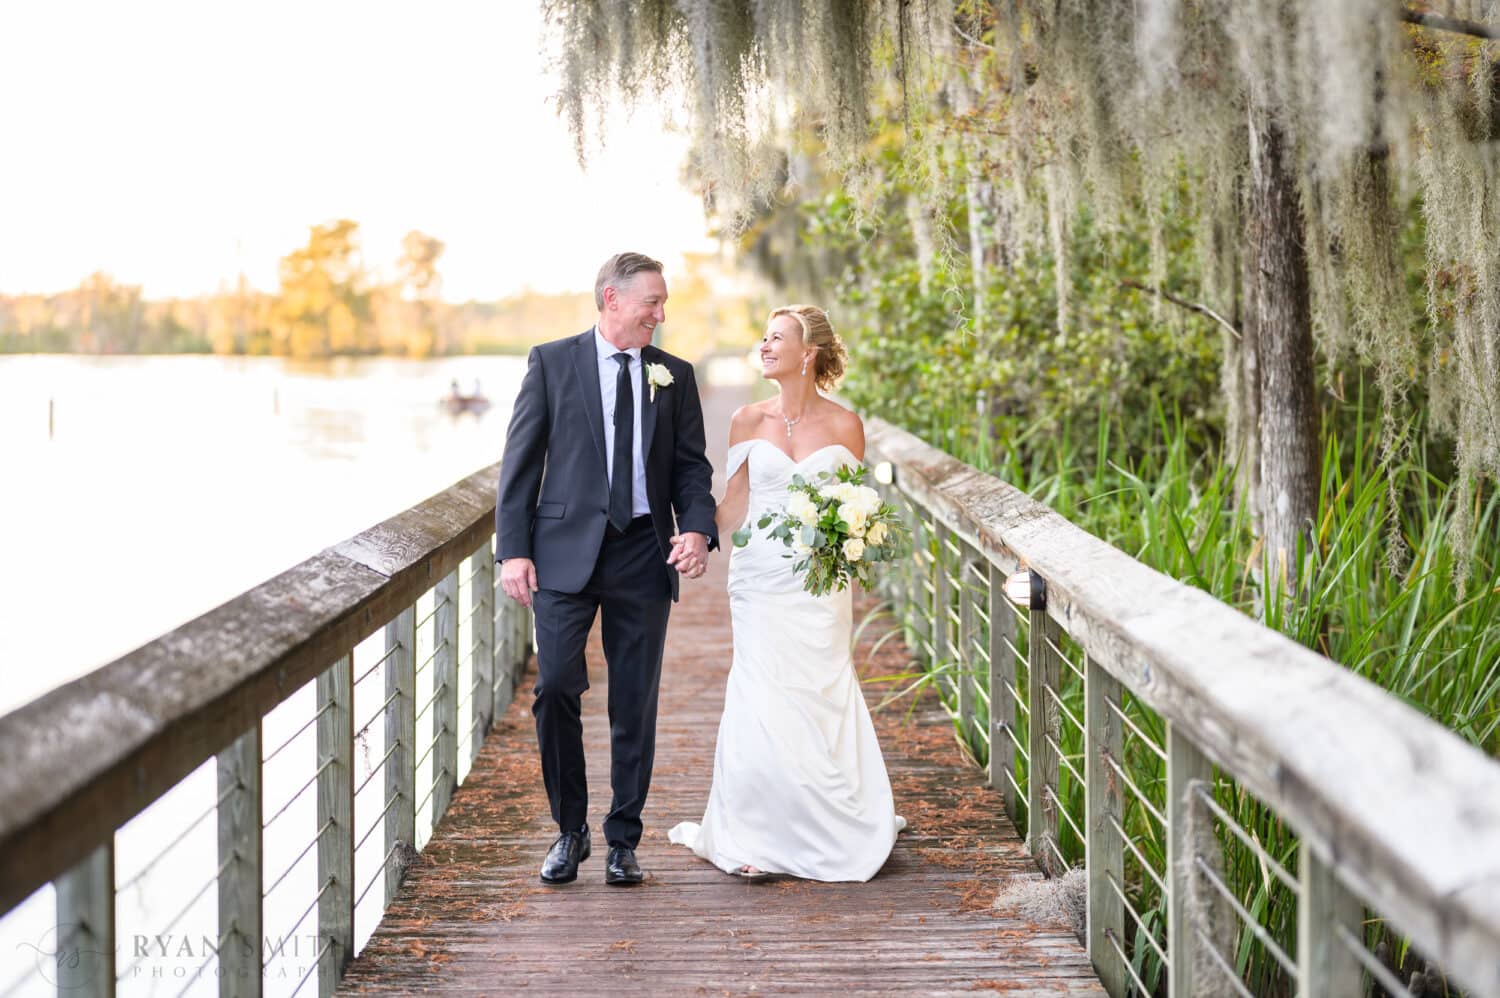 Holding hands walk down the boardwalk on the Waccamaw River - Safe Harbor Reserve Harbor Yacht Club